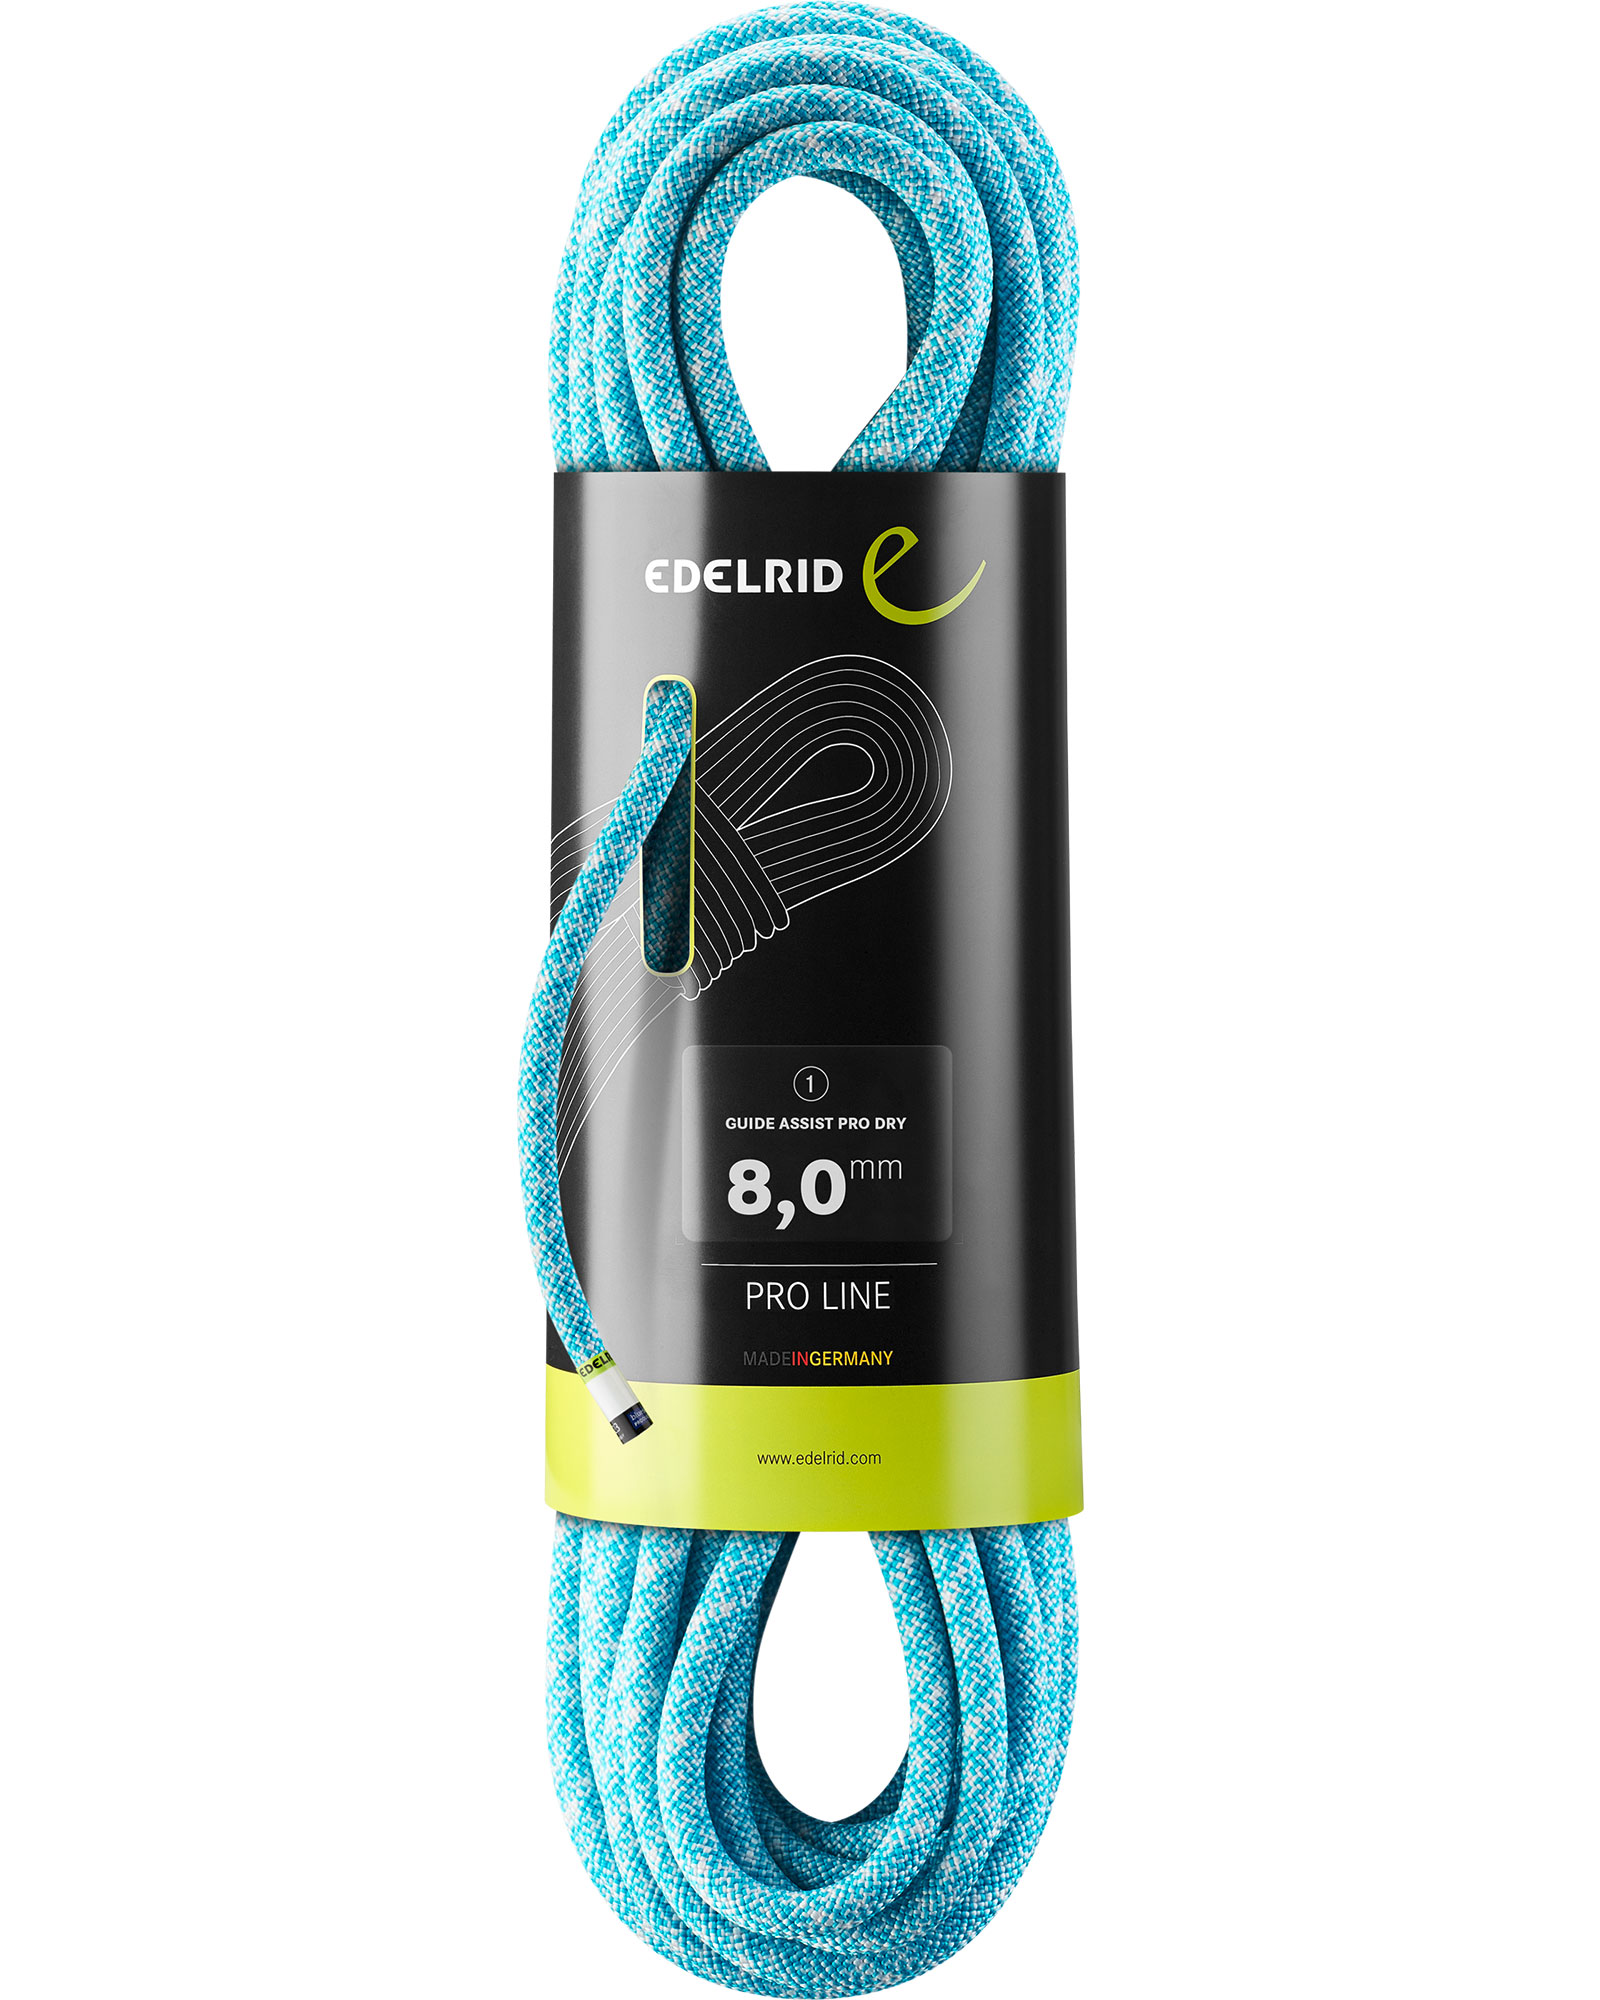 Edelrid Guide Assist Pro Dry 8.0 x 20 Rope 0